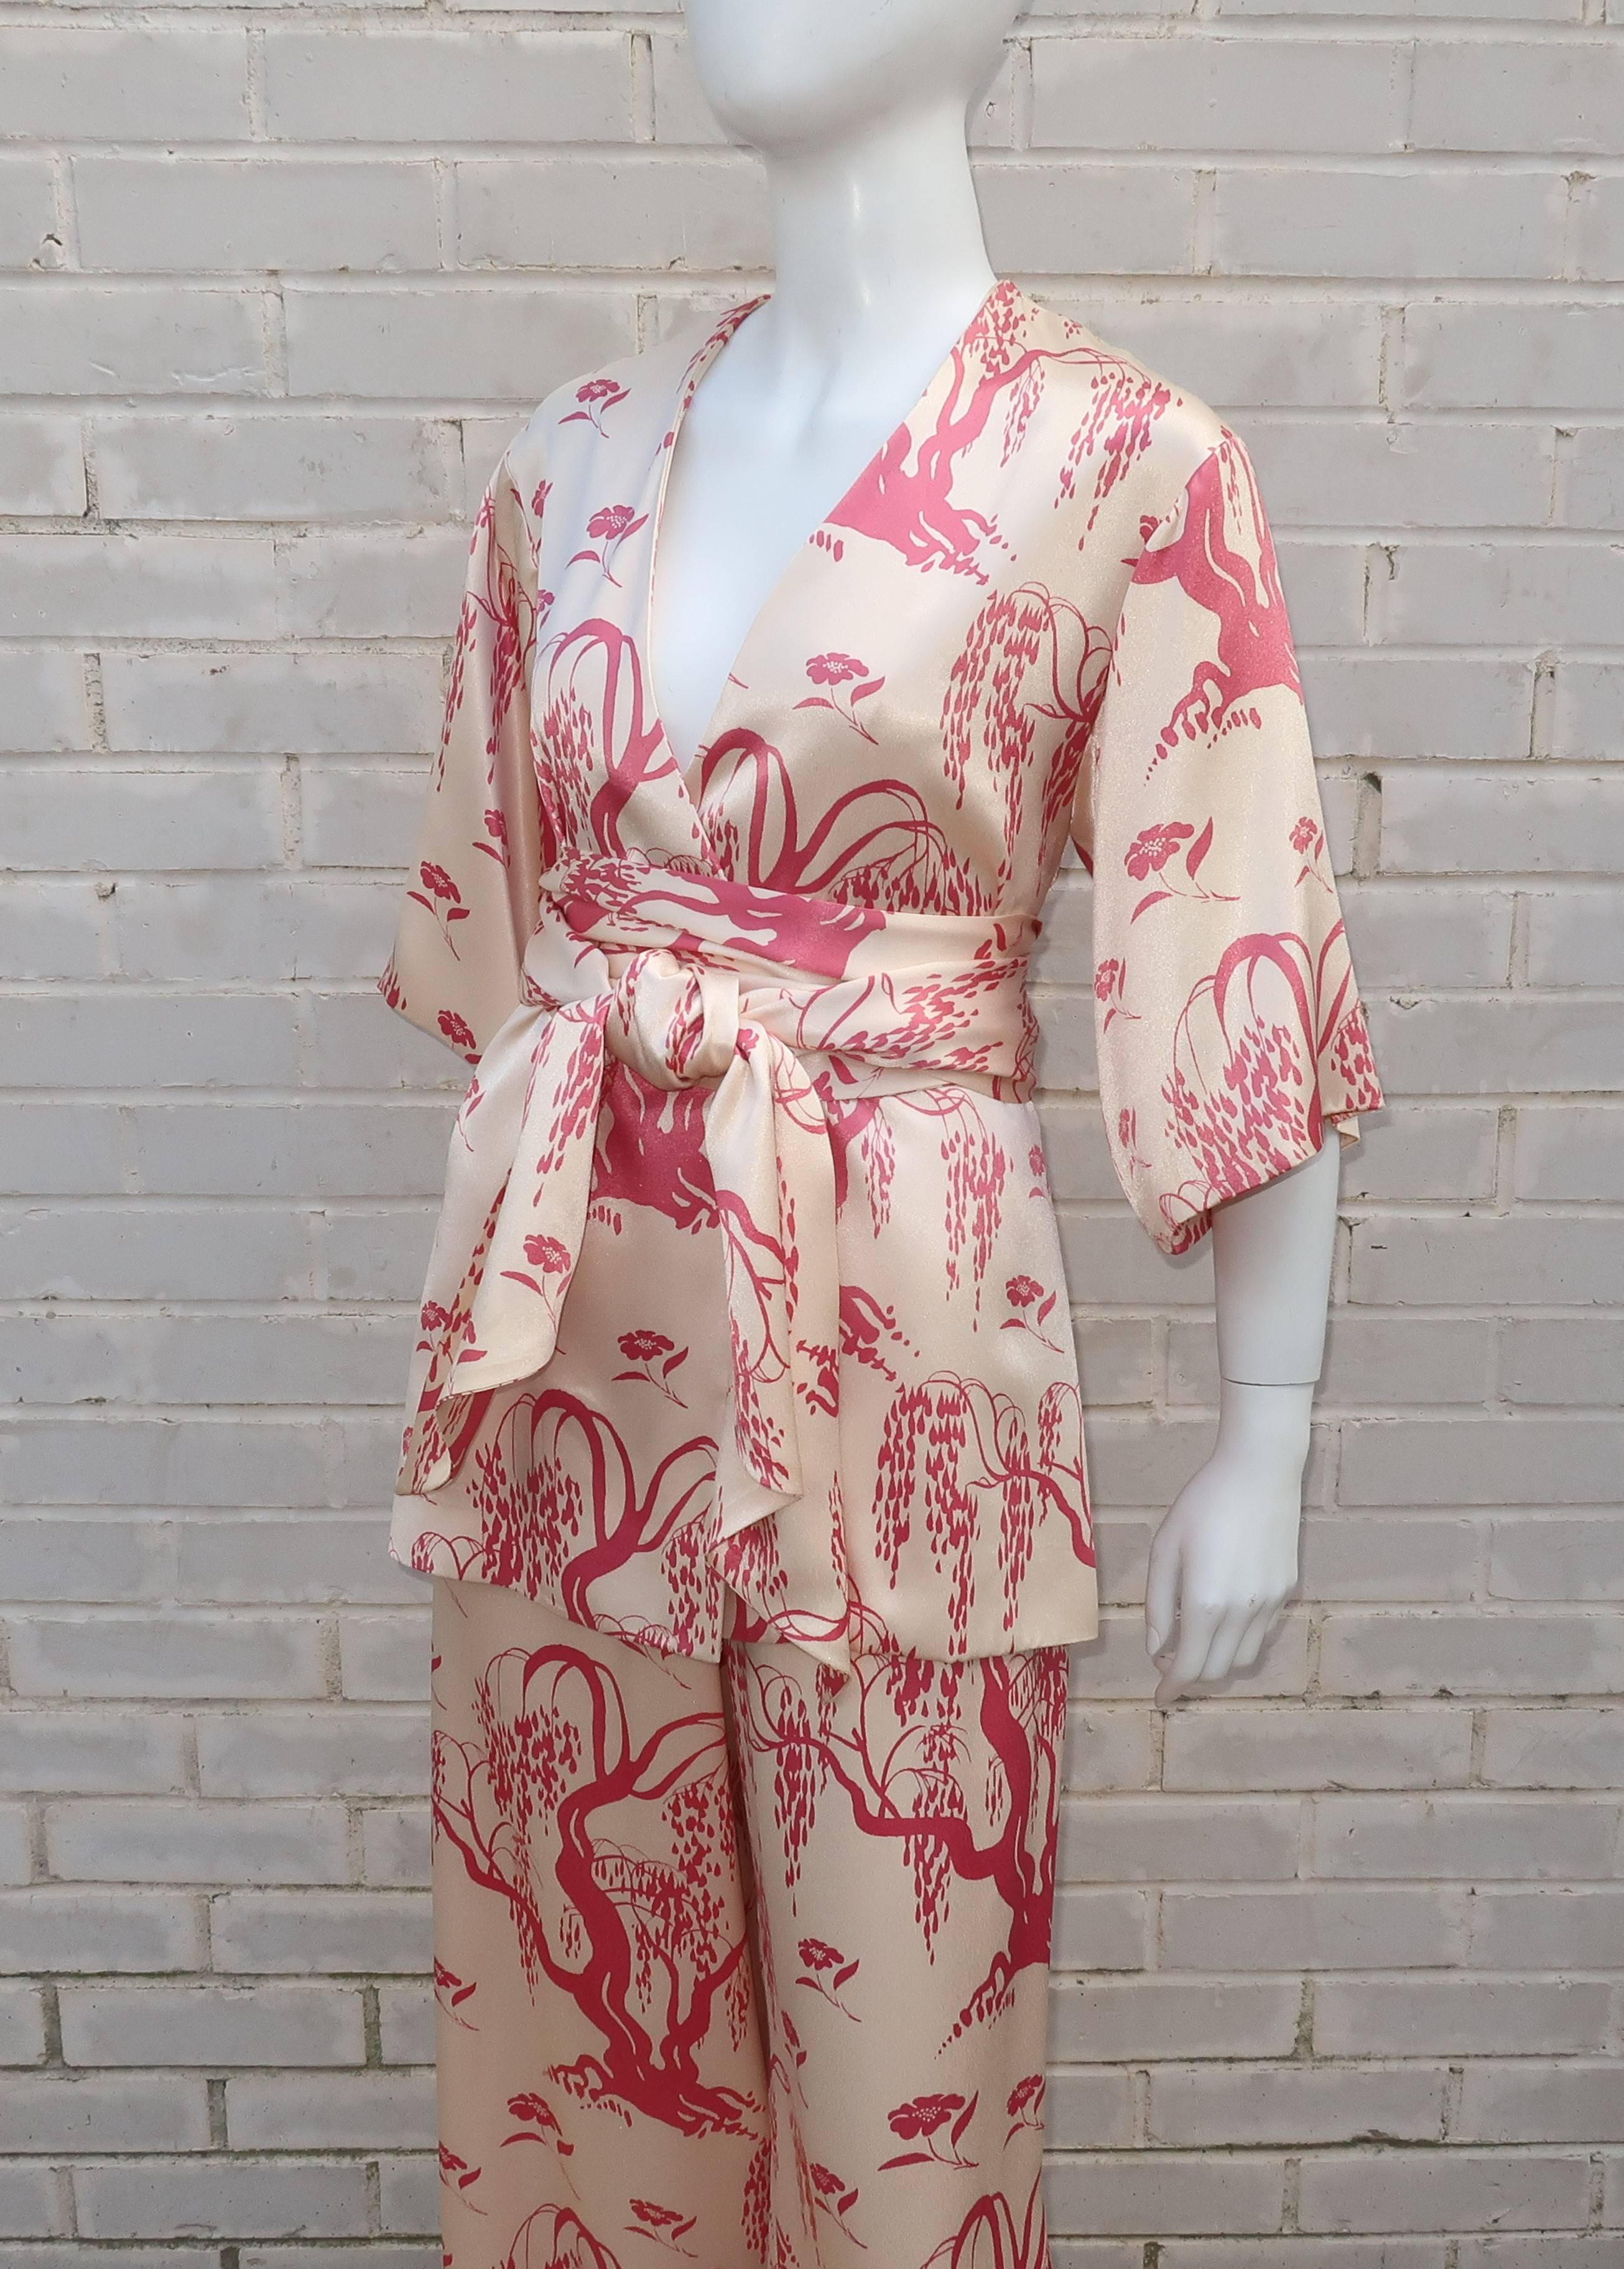 Anthony Muto was known for designing reasonably priced evening wear with special attention to comfort and effortless style.  This two piece 1970's ensemble for his label, Marita, has the casual and yet romantic look of Japanese pajamas with a